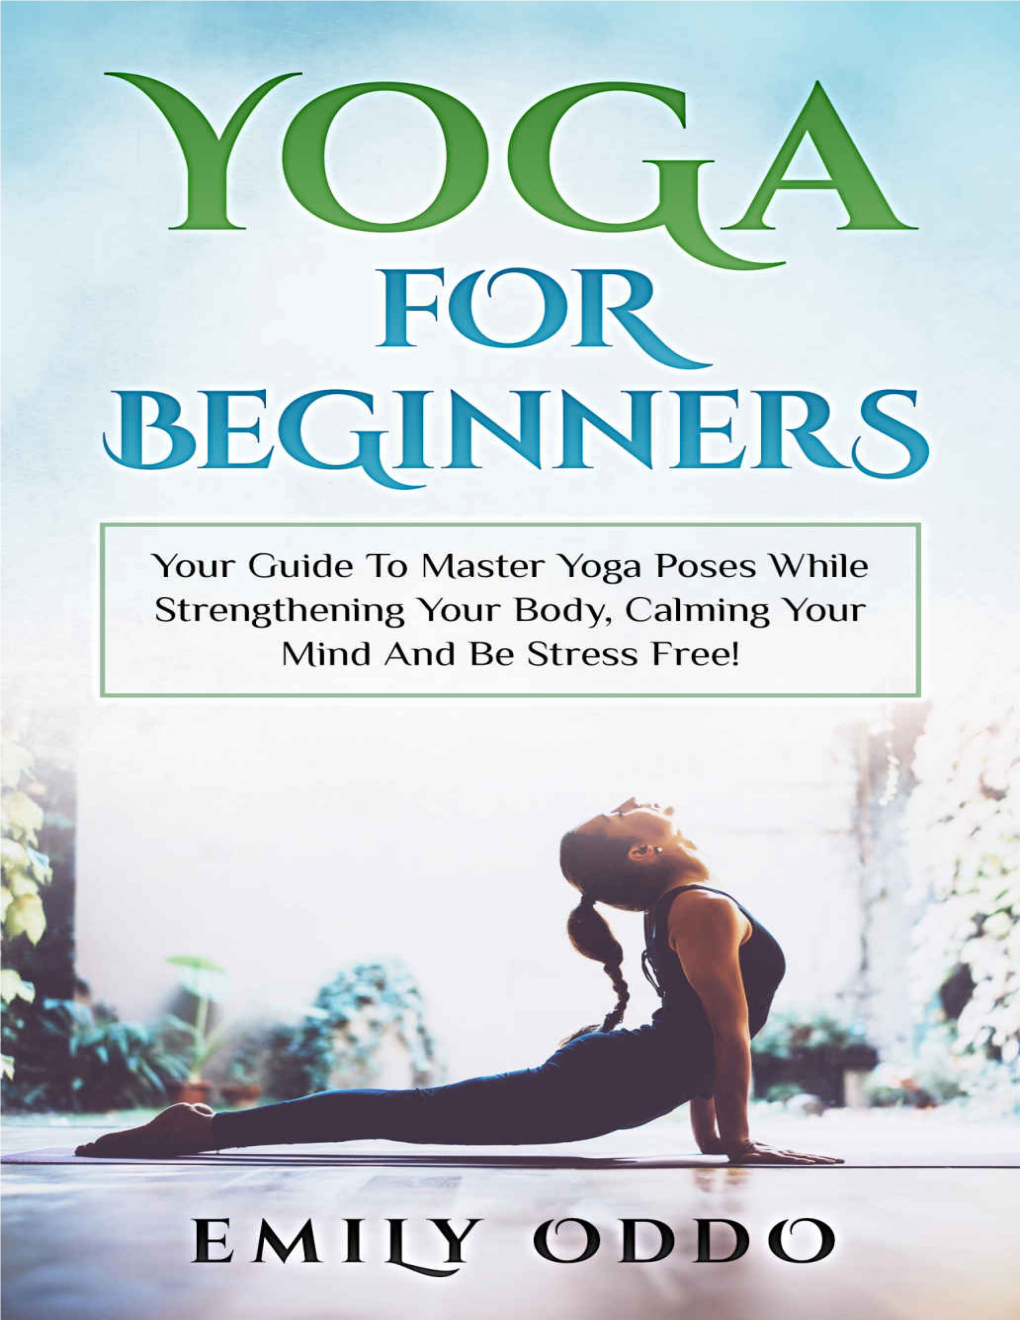 Yoga for Beginners Your Guide to Master Yoga Poses While Strengthening Your Body, Calming Your Mind and Be Stress-Free!